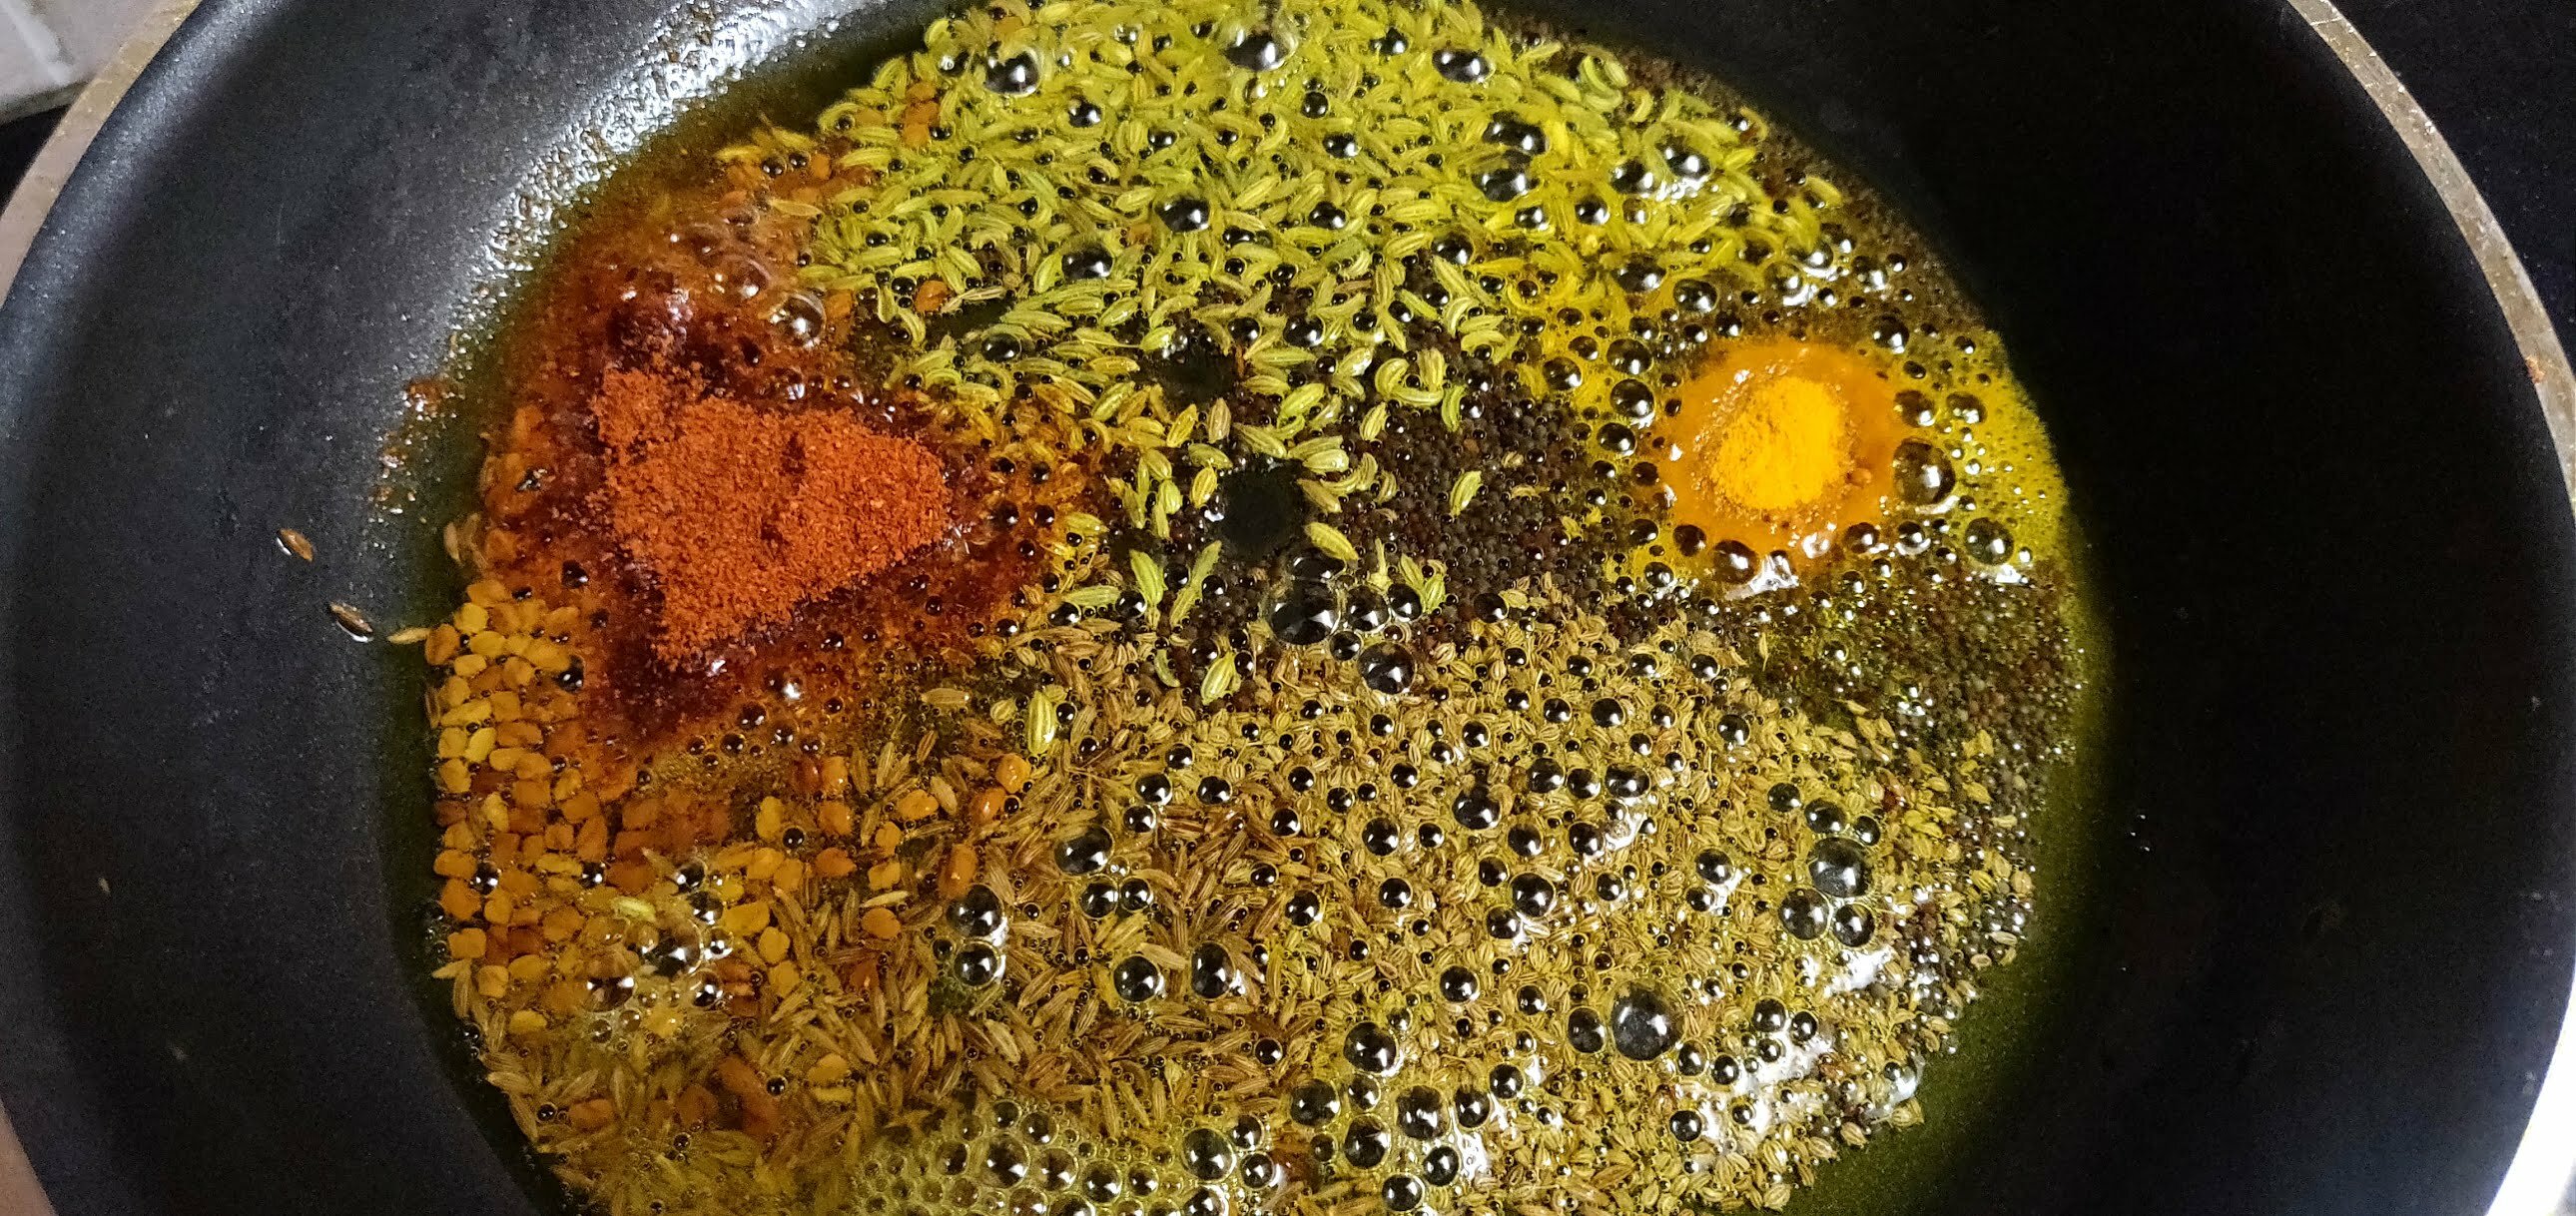 Roasting powdered spices.